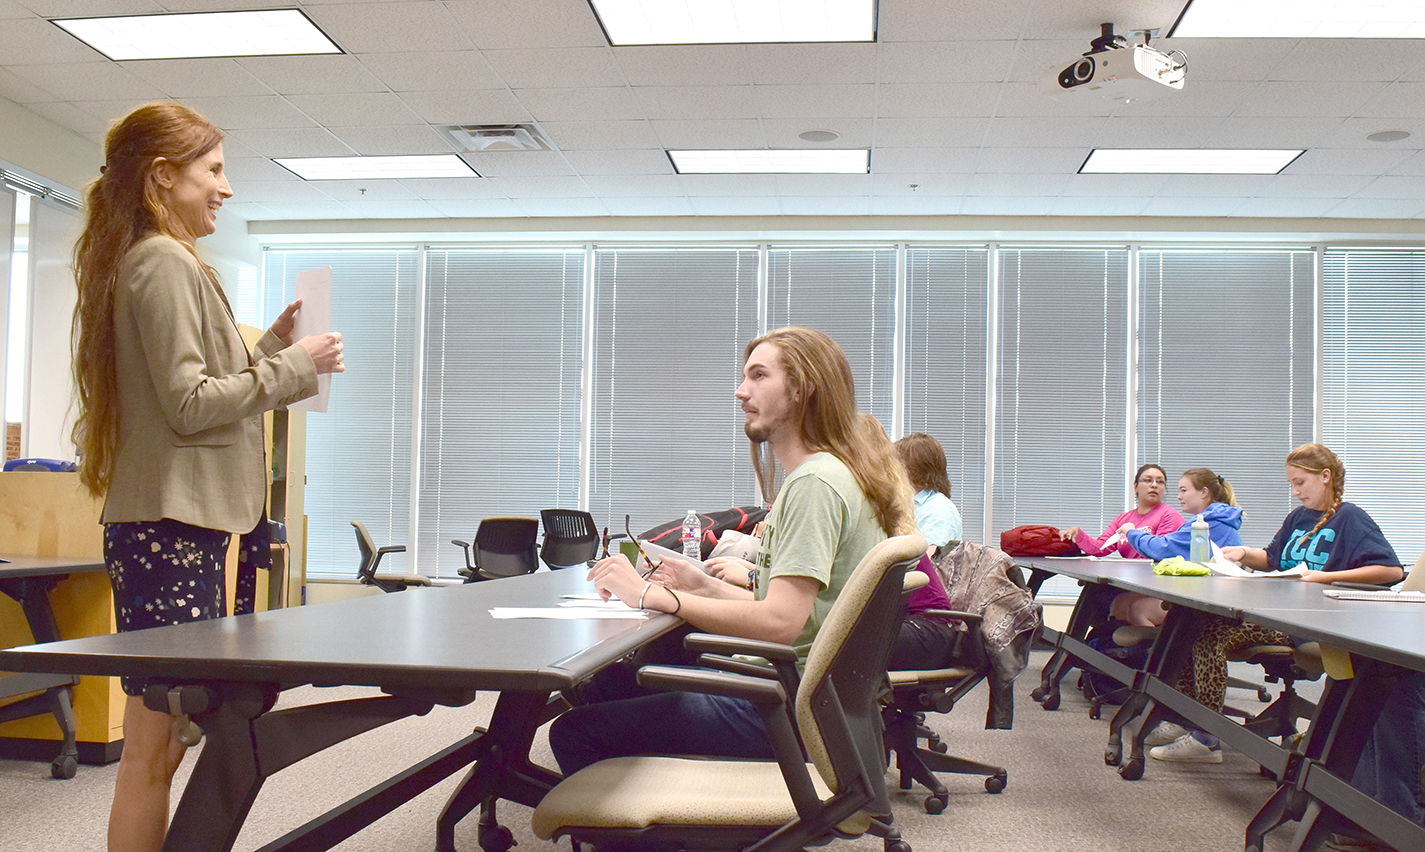 NW government professor and pre-law advisor Julie Lantrip explains moot court boot camp to debate students during their first meeting of the semester Sept. 12.